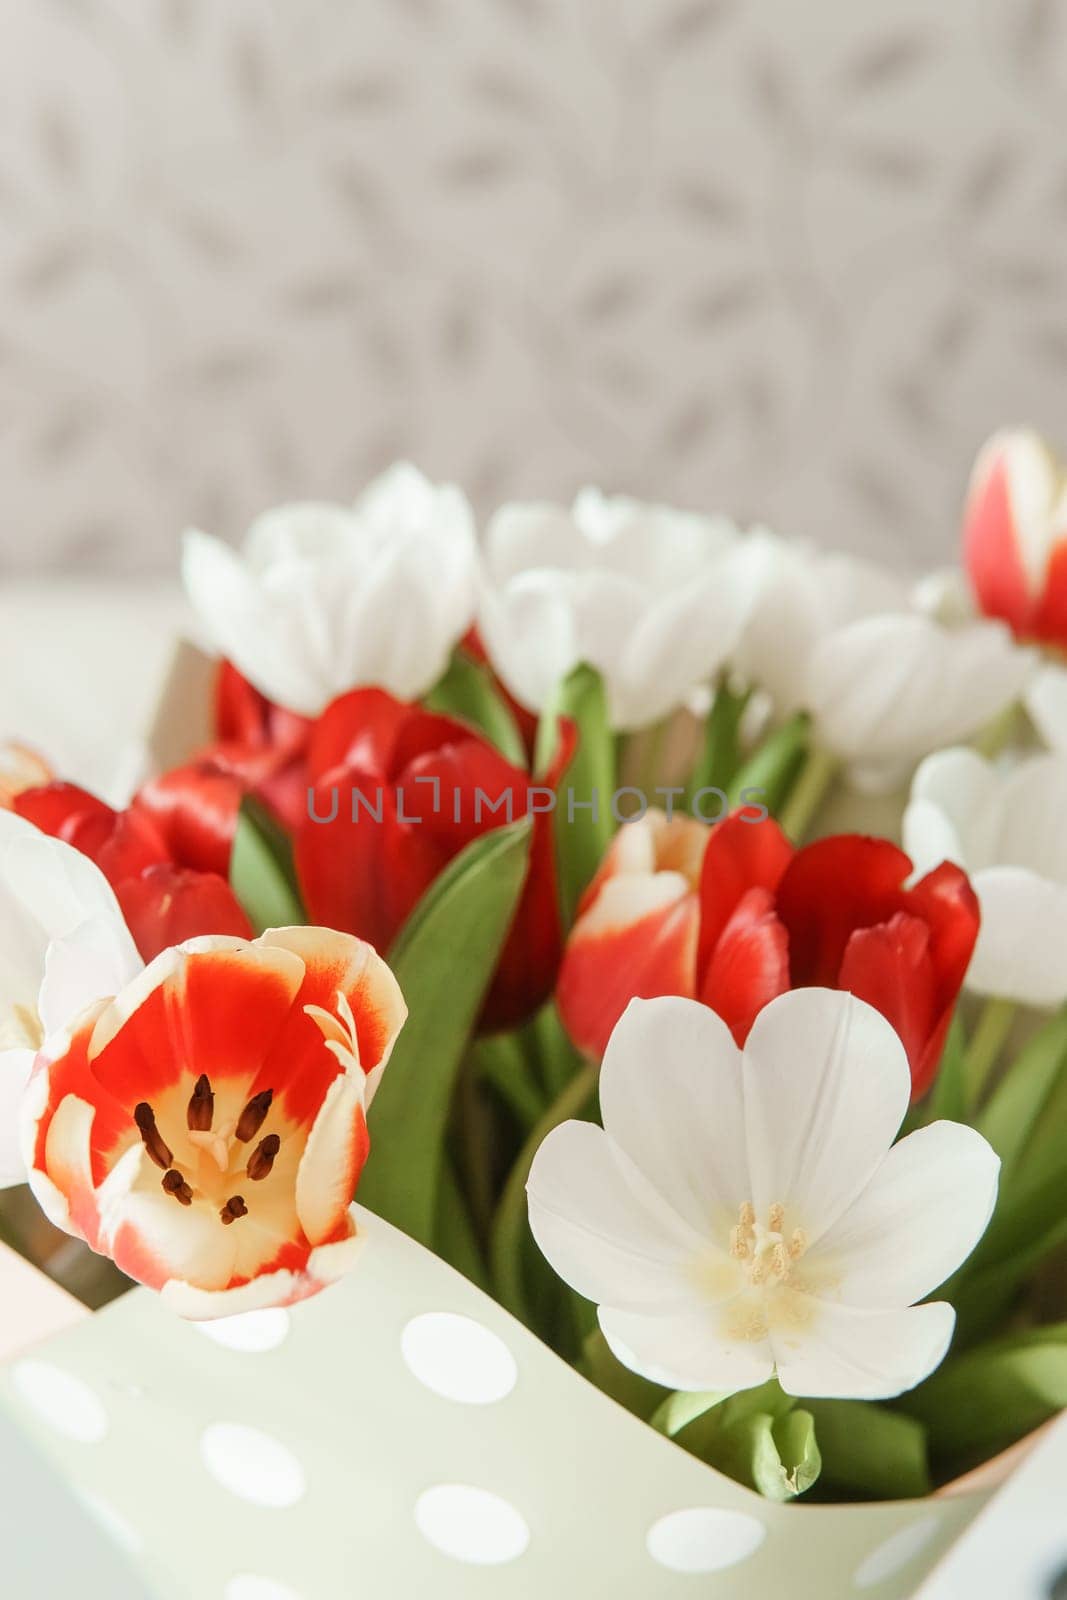 Celebration of Beauty: Tulips in Close-up as a Gift for March 8th